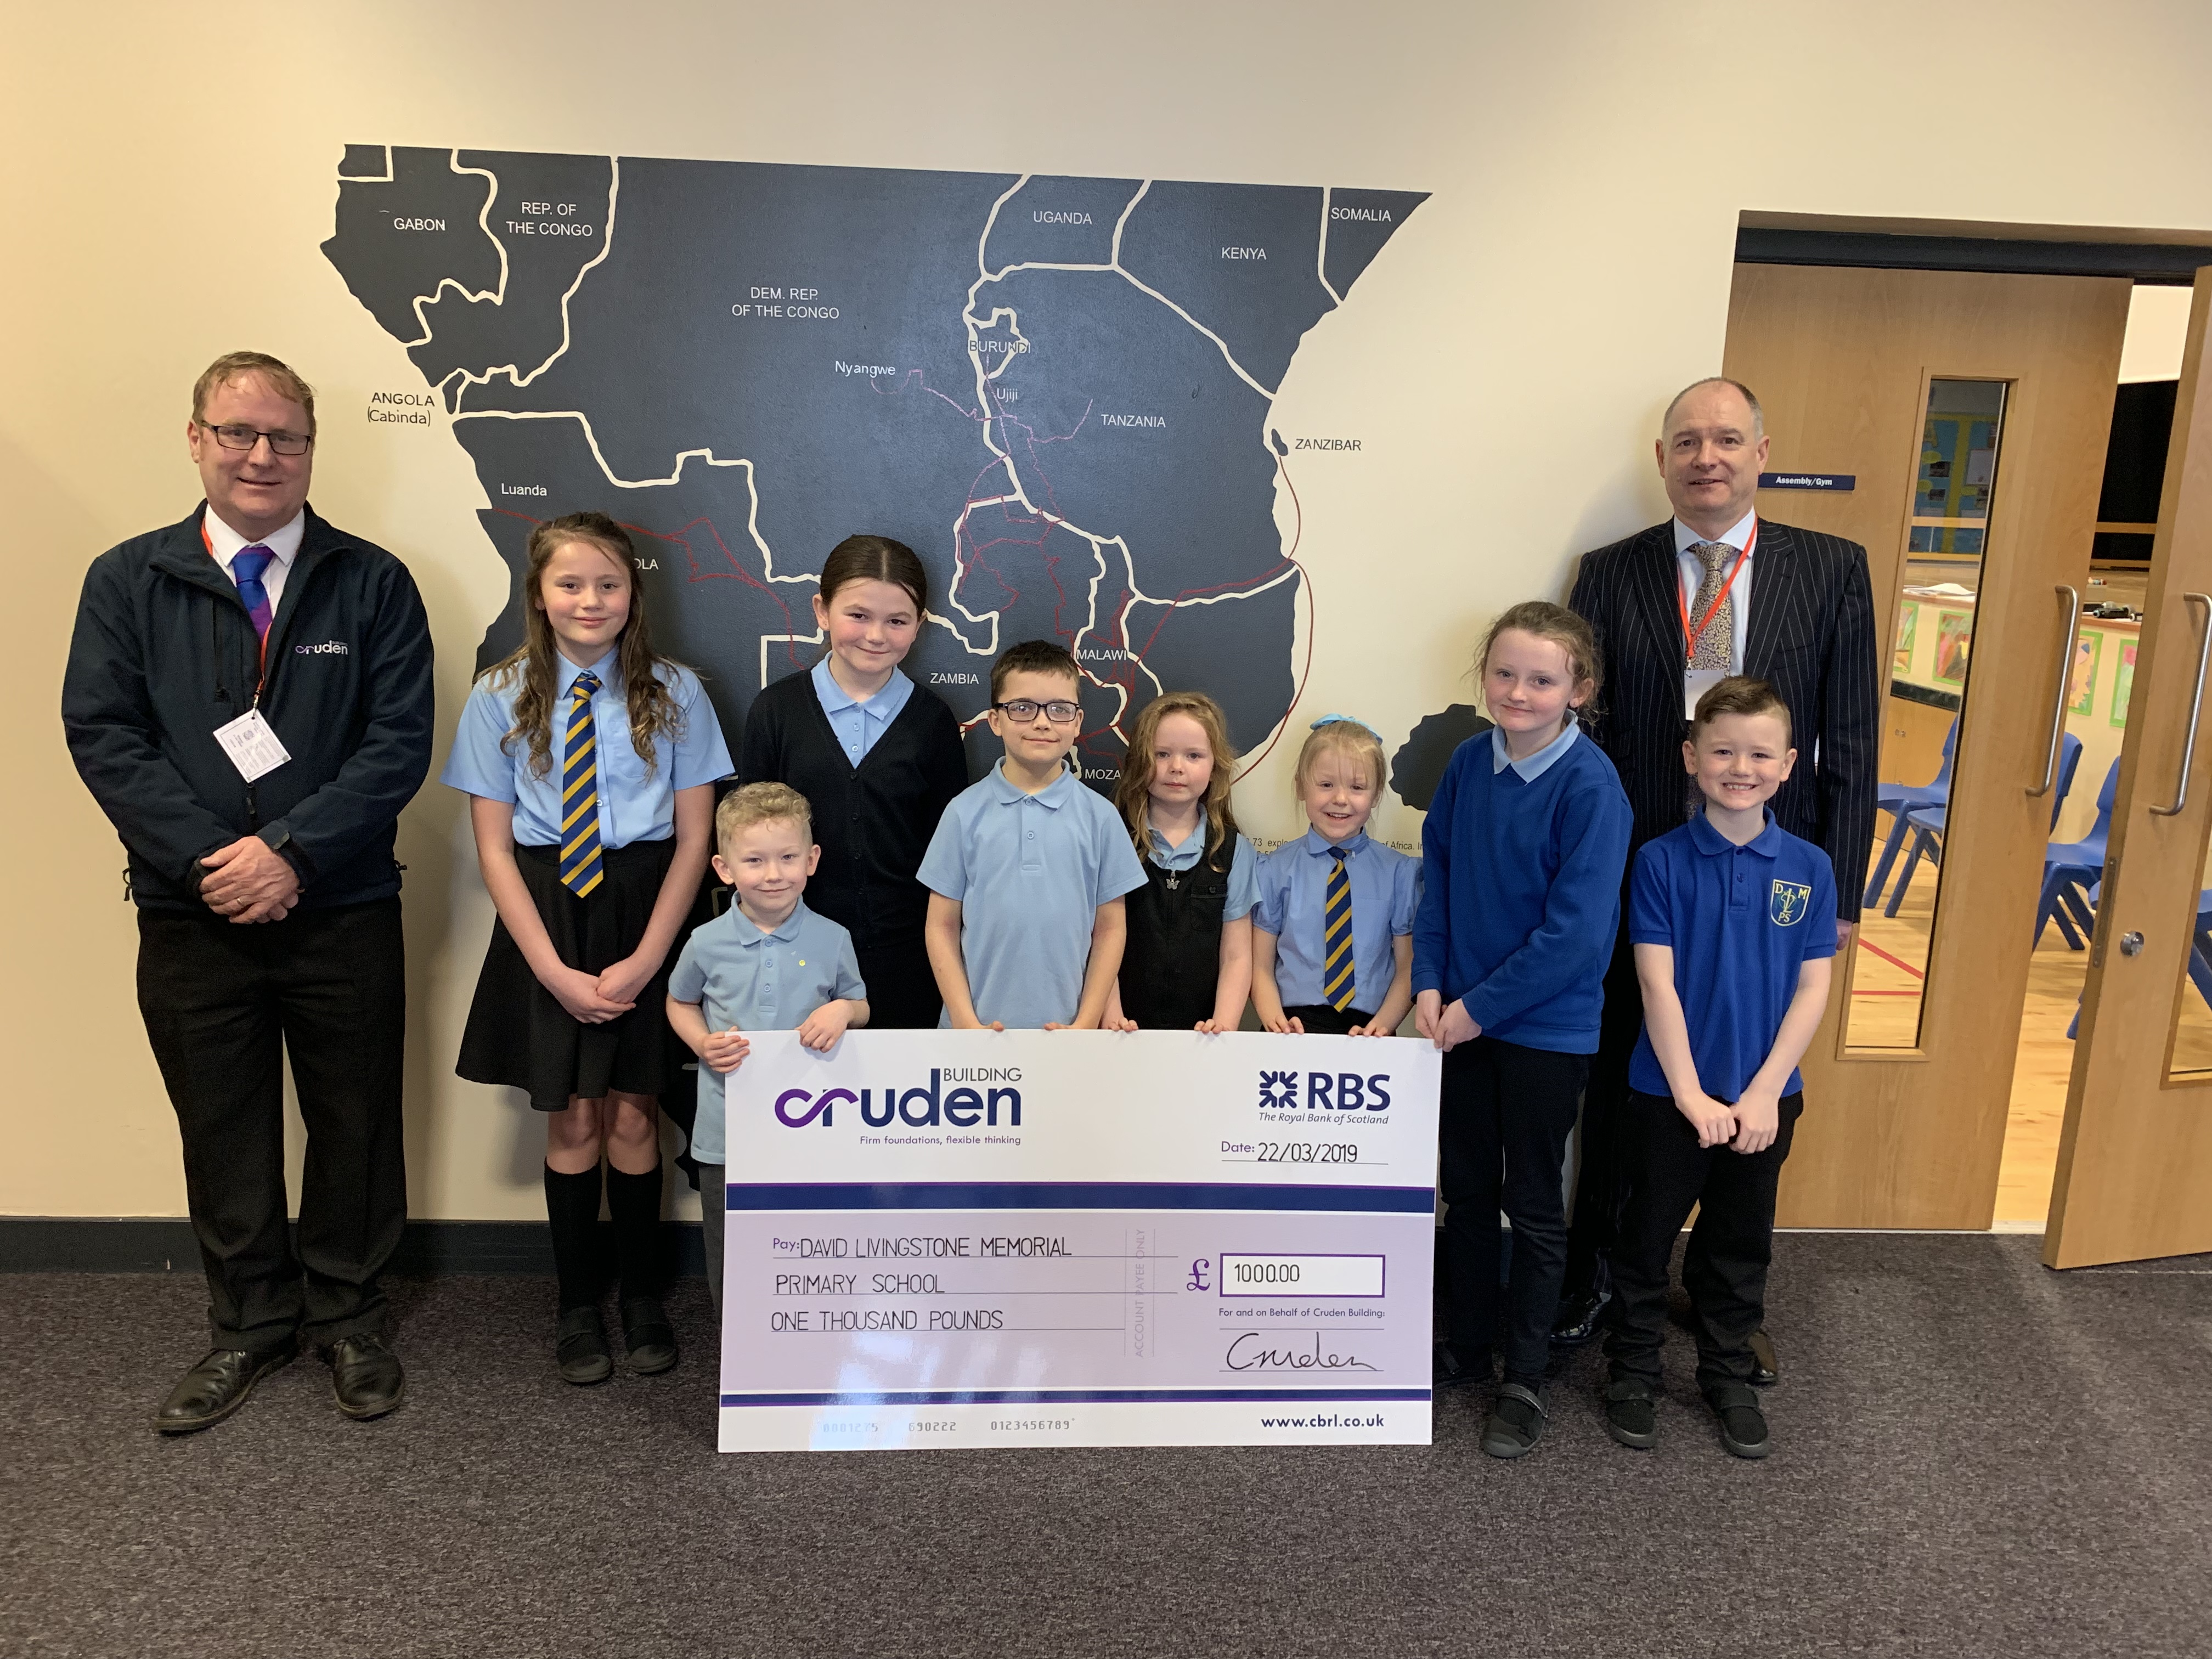 Cruden gives back to local community with £1,000 donation